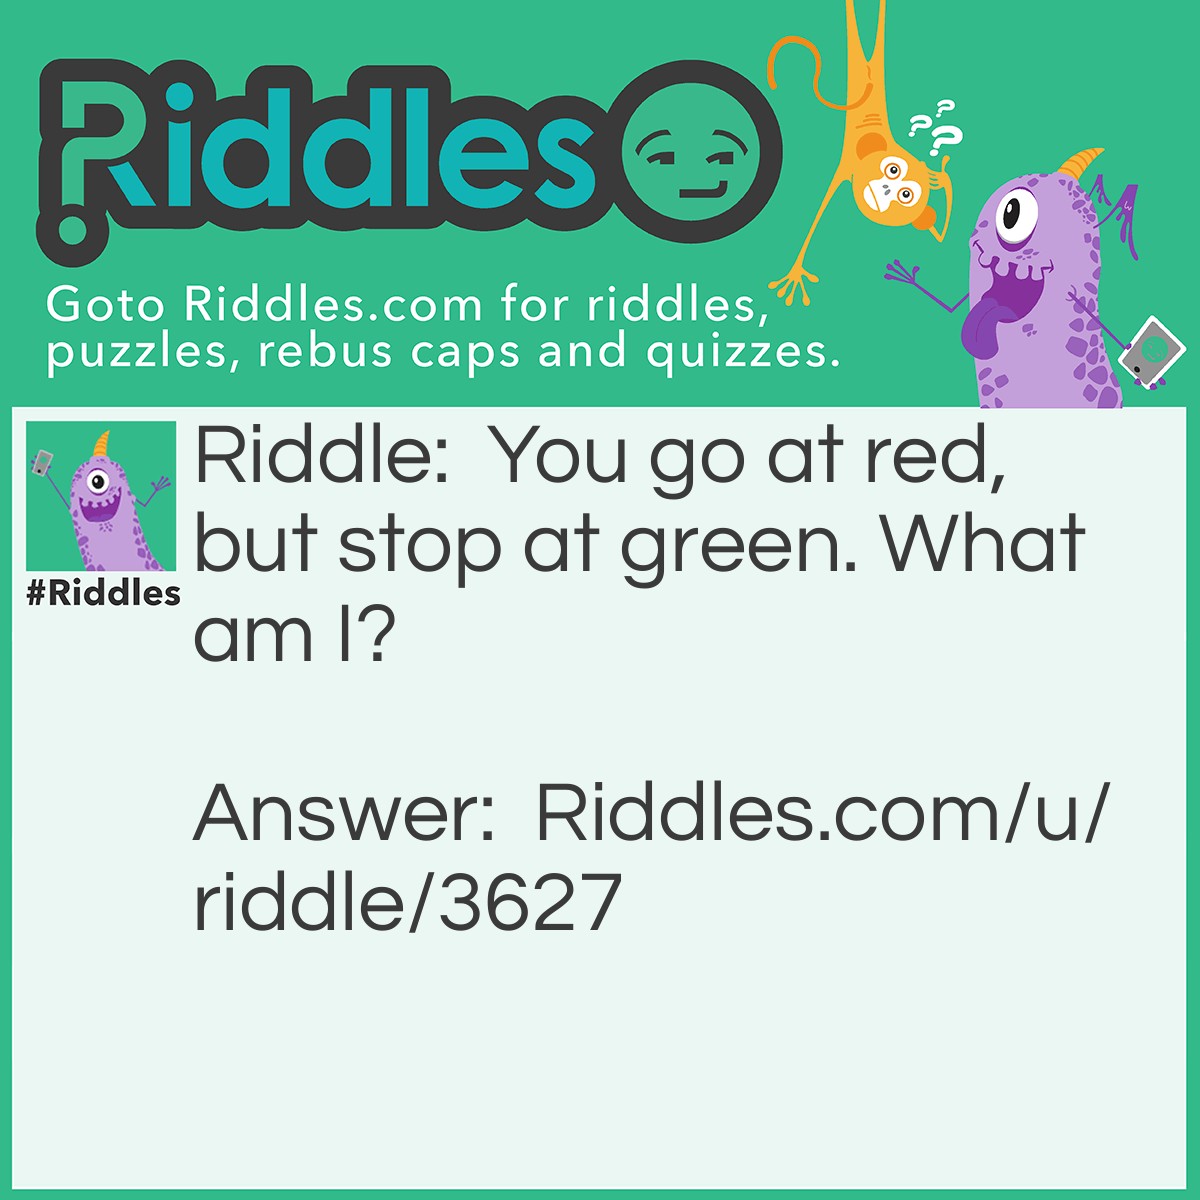 Riddle: You go at red, but stop at green. What am I? Answer: Watermelon! You eat the red part, and you stop eating at the green part.